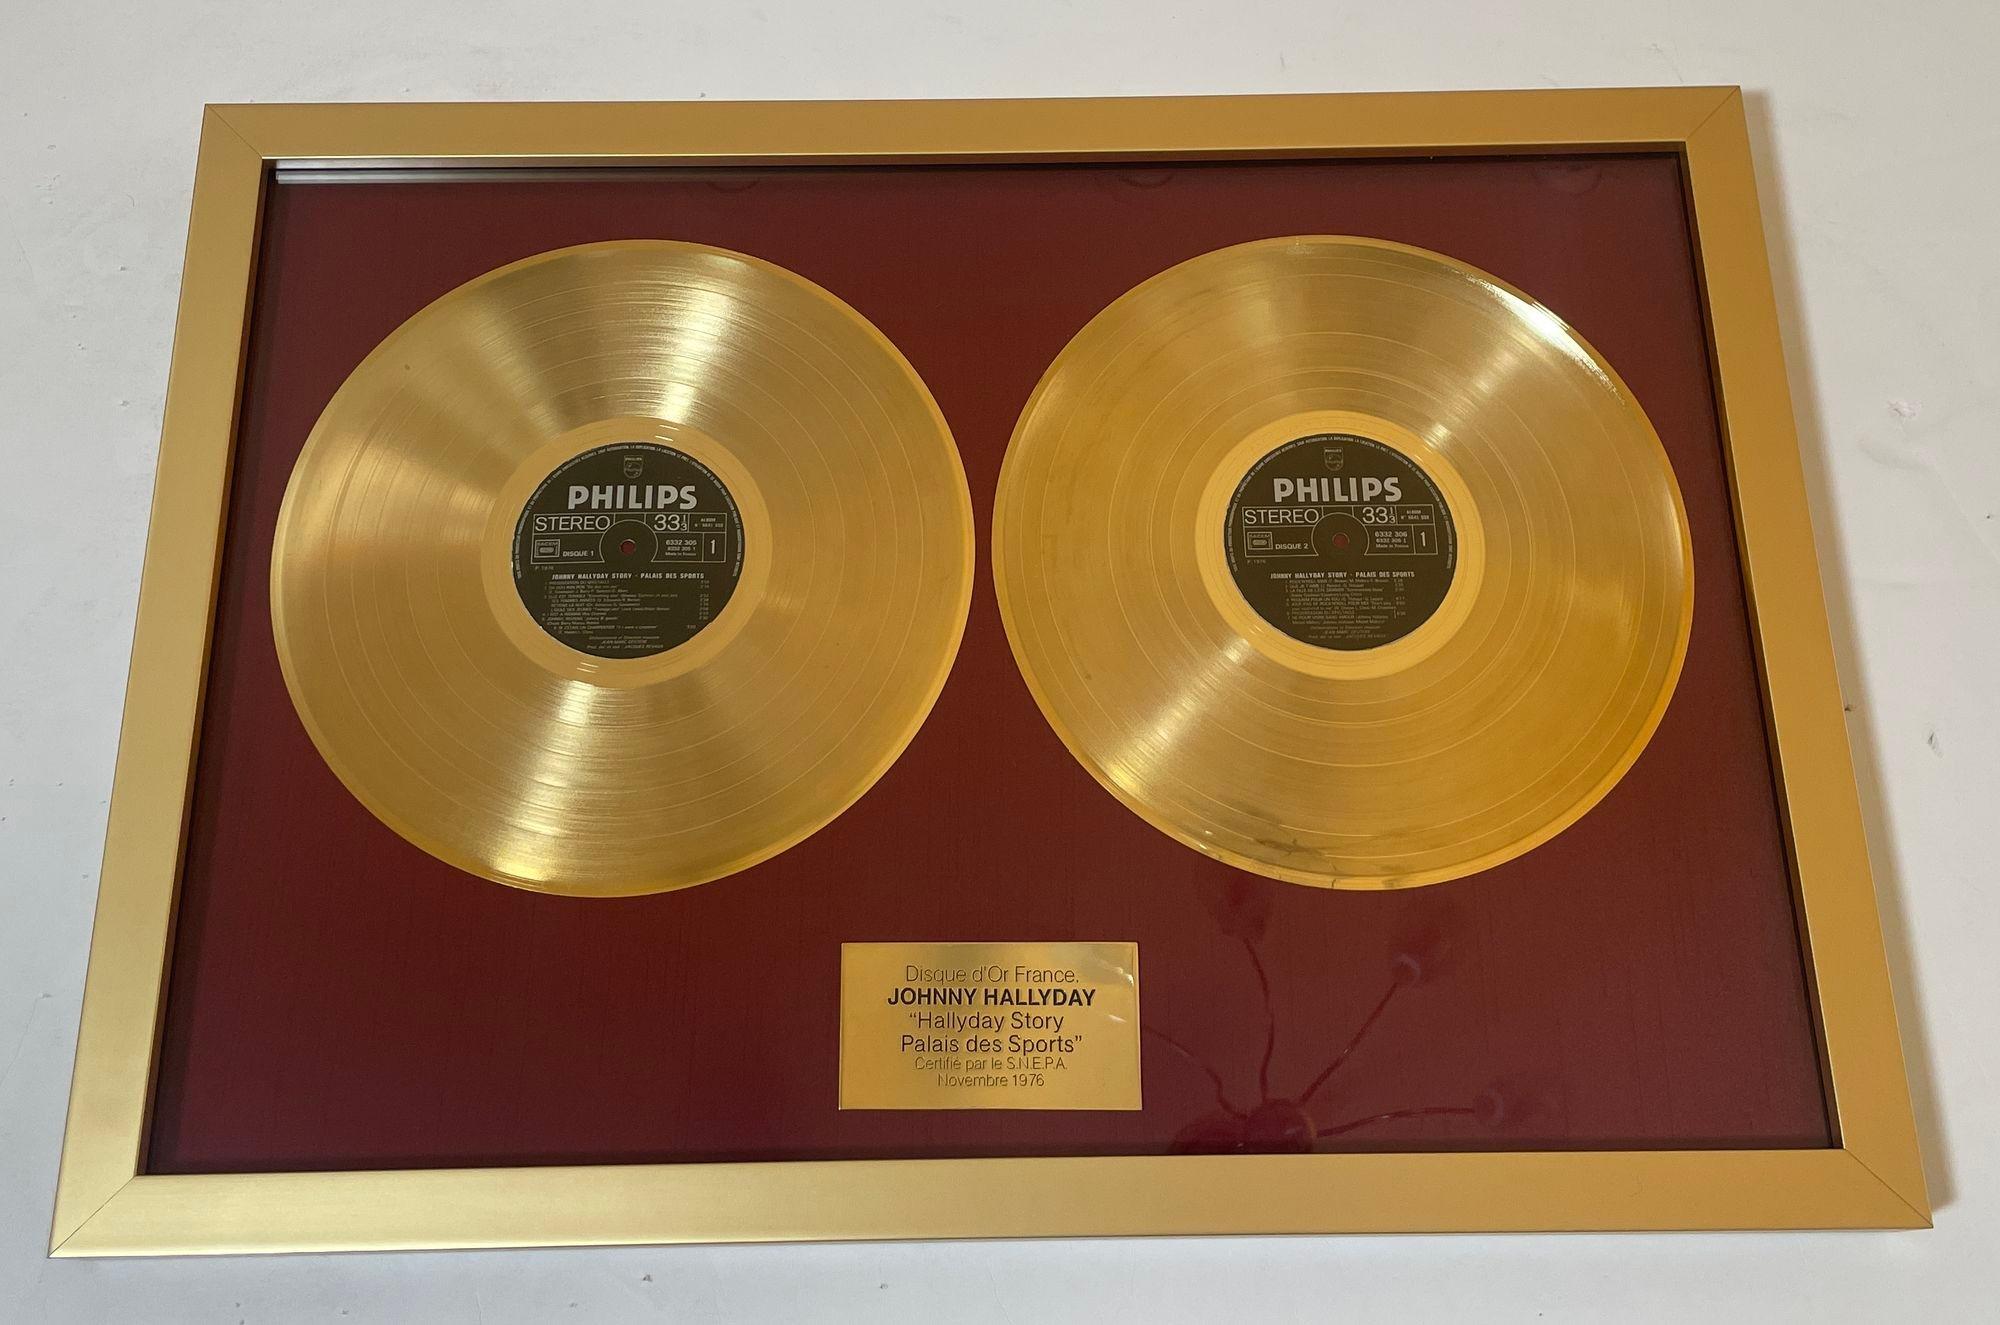 Official Gold Record Award France Johnny Halliday Story Palais des Sports 1976 For Sale 4